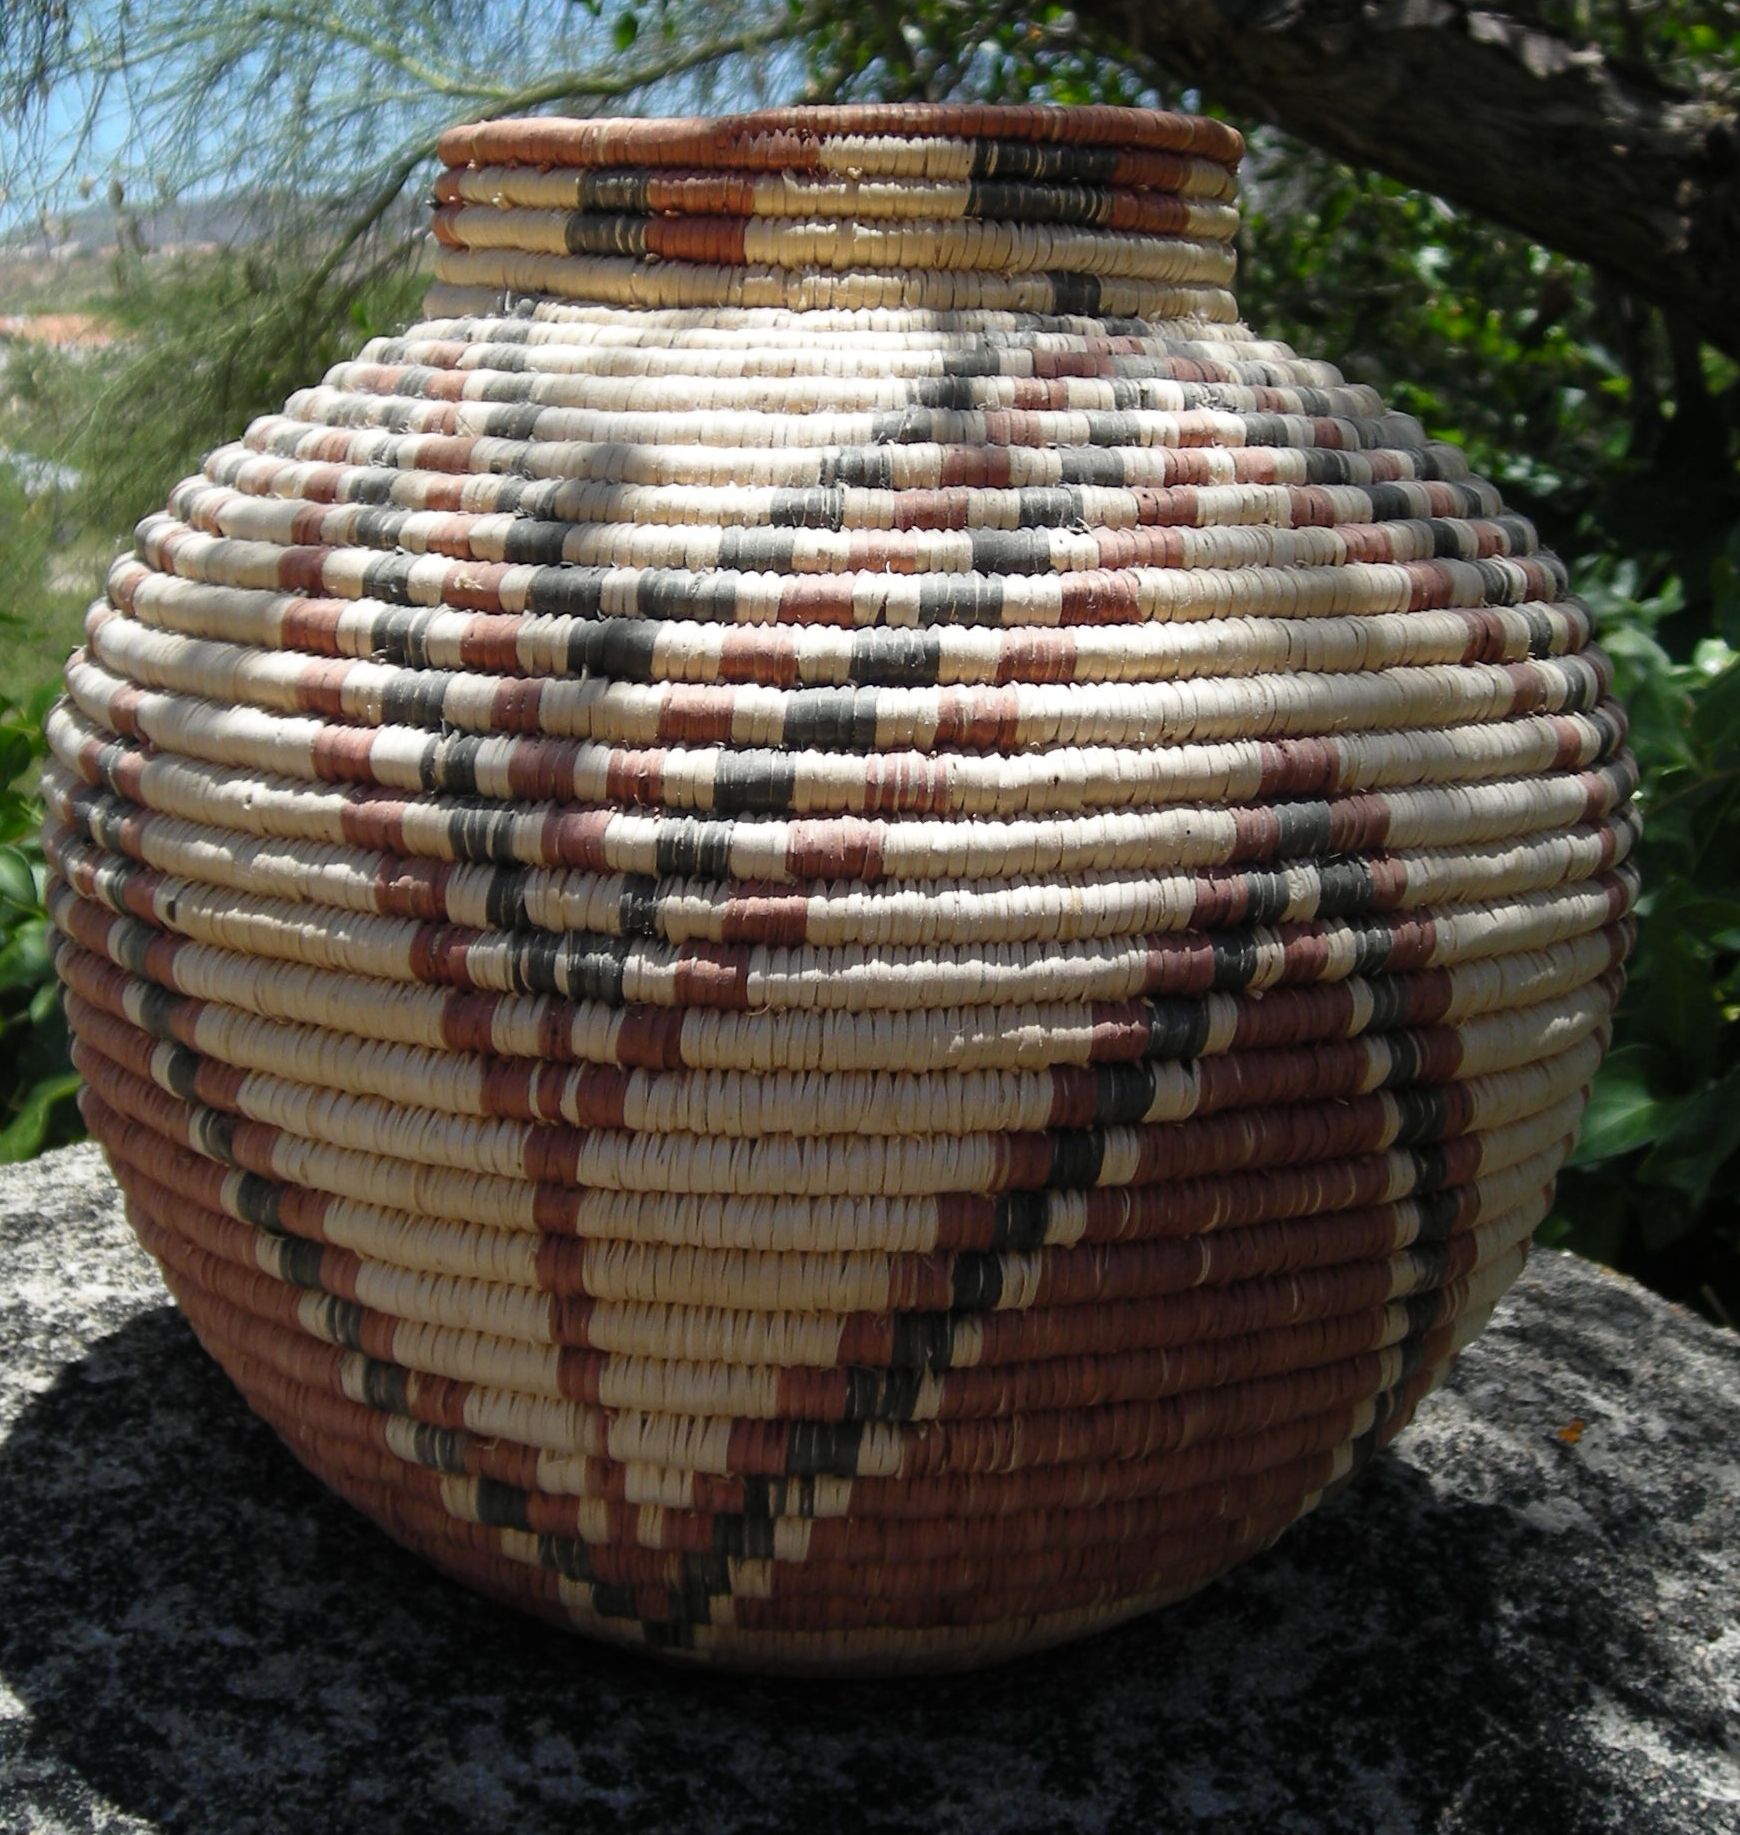 A Seri basket of the haat hanóohcö style, Sonora, Mexico. Photo taken on June 19, 2007.